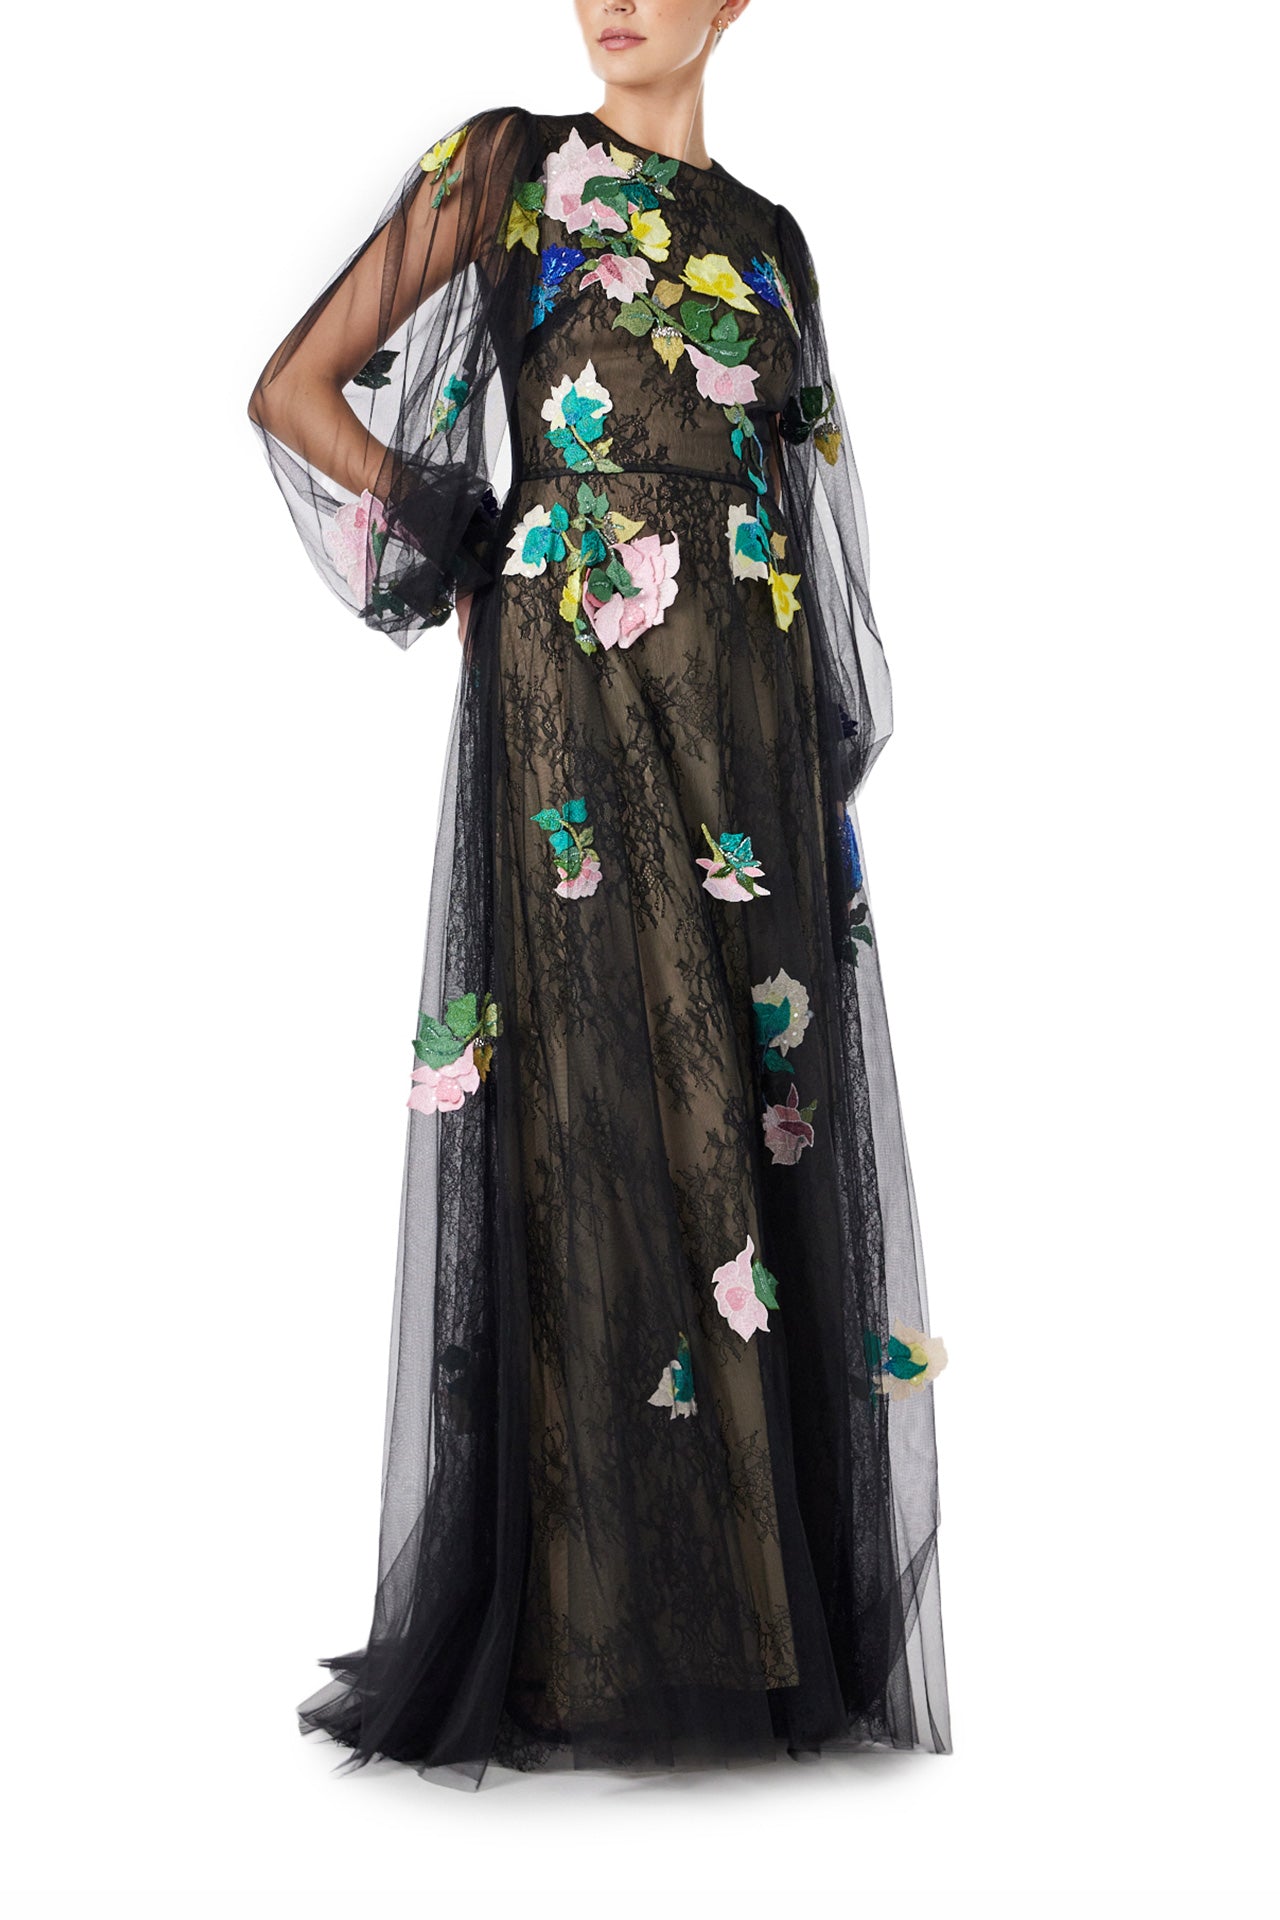 Monique Lhuillier Spring 2024 jewel neck, puff sleeve gown with sheer sleeves and floral embroidery over a lace underlay in black tulle - right side.